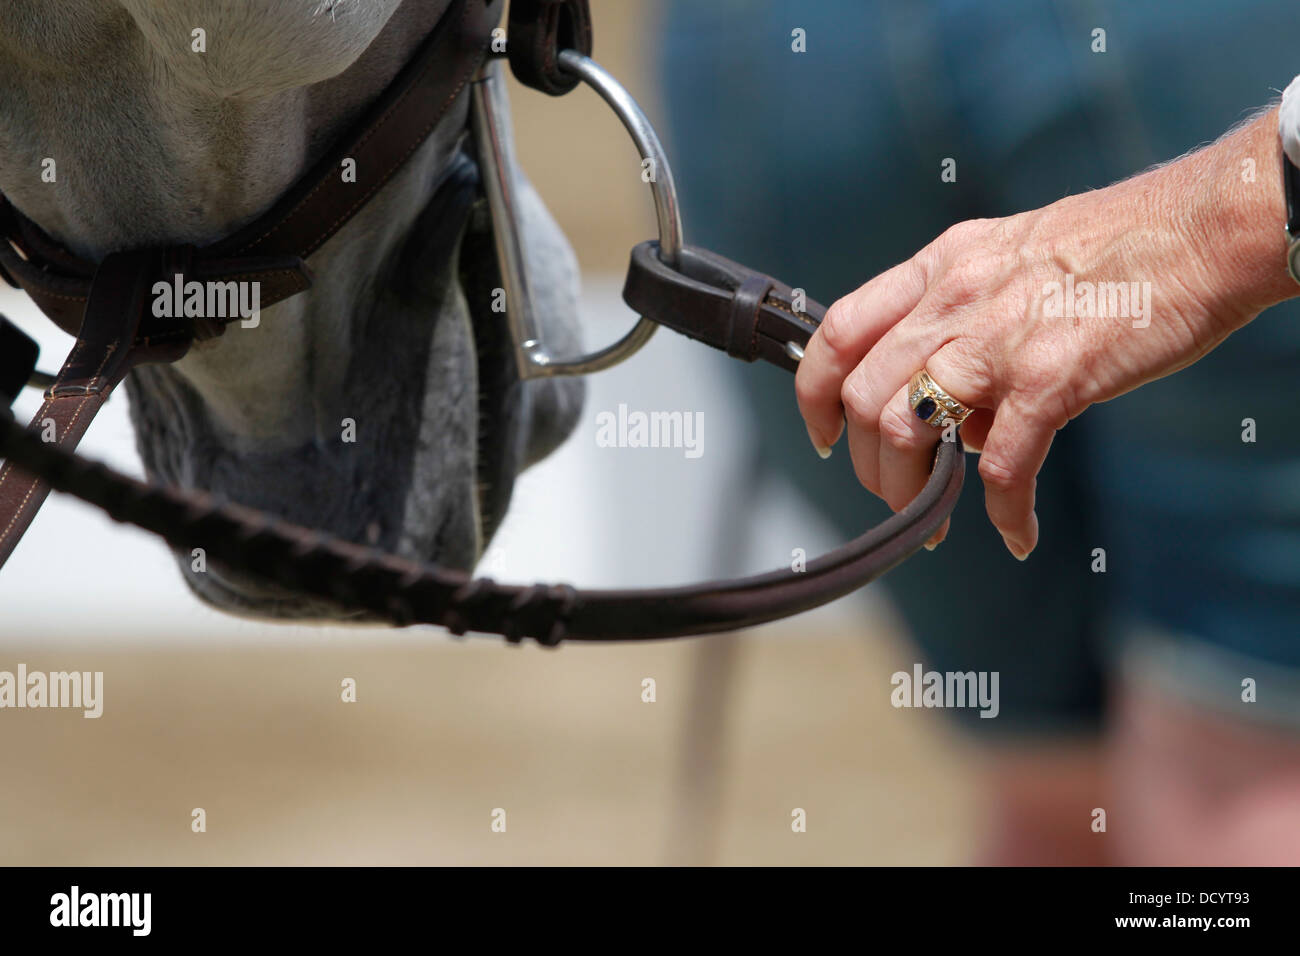 A close-up image of a woman's hand holding the reins of a horse. Stock Photo